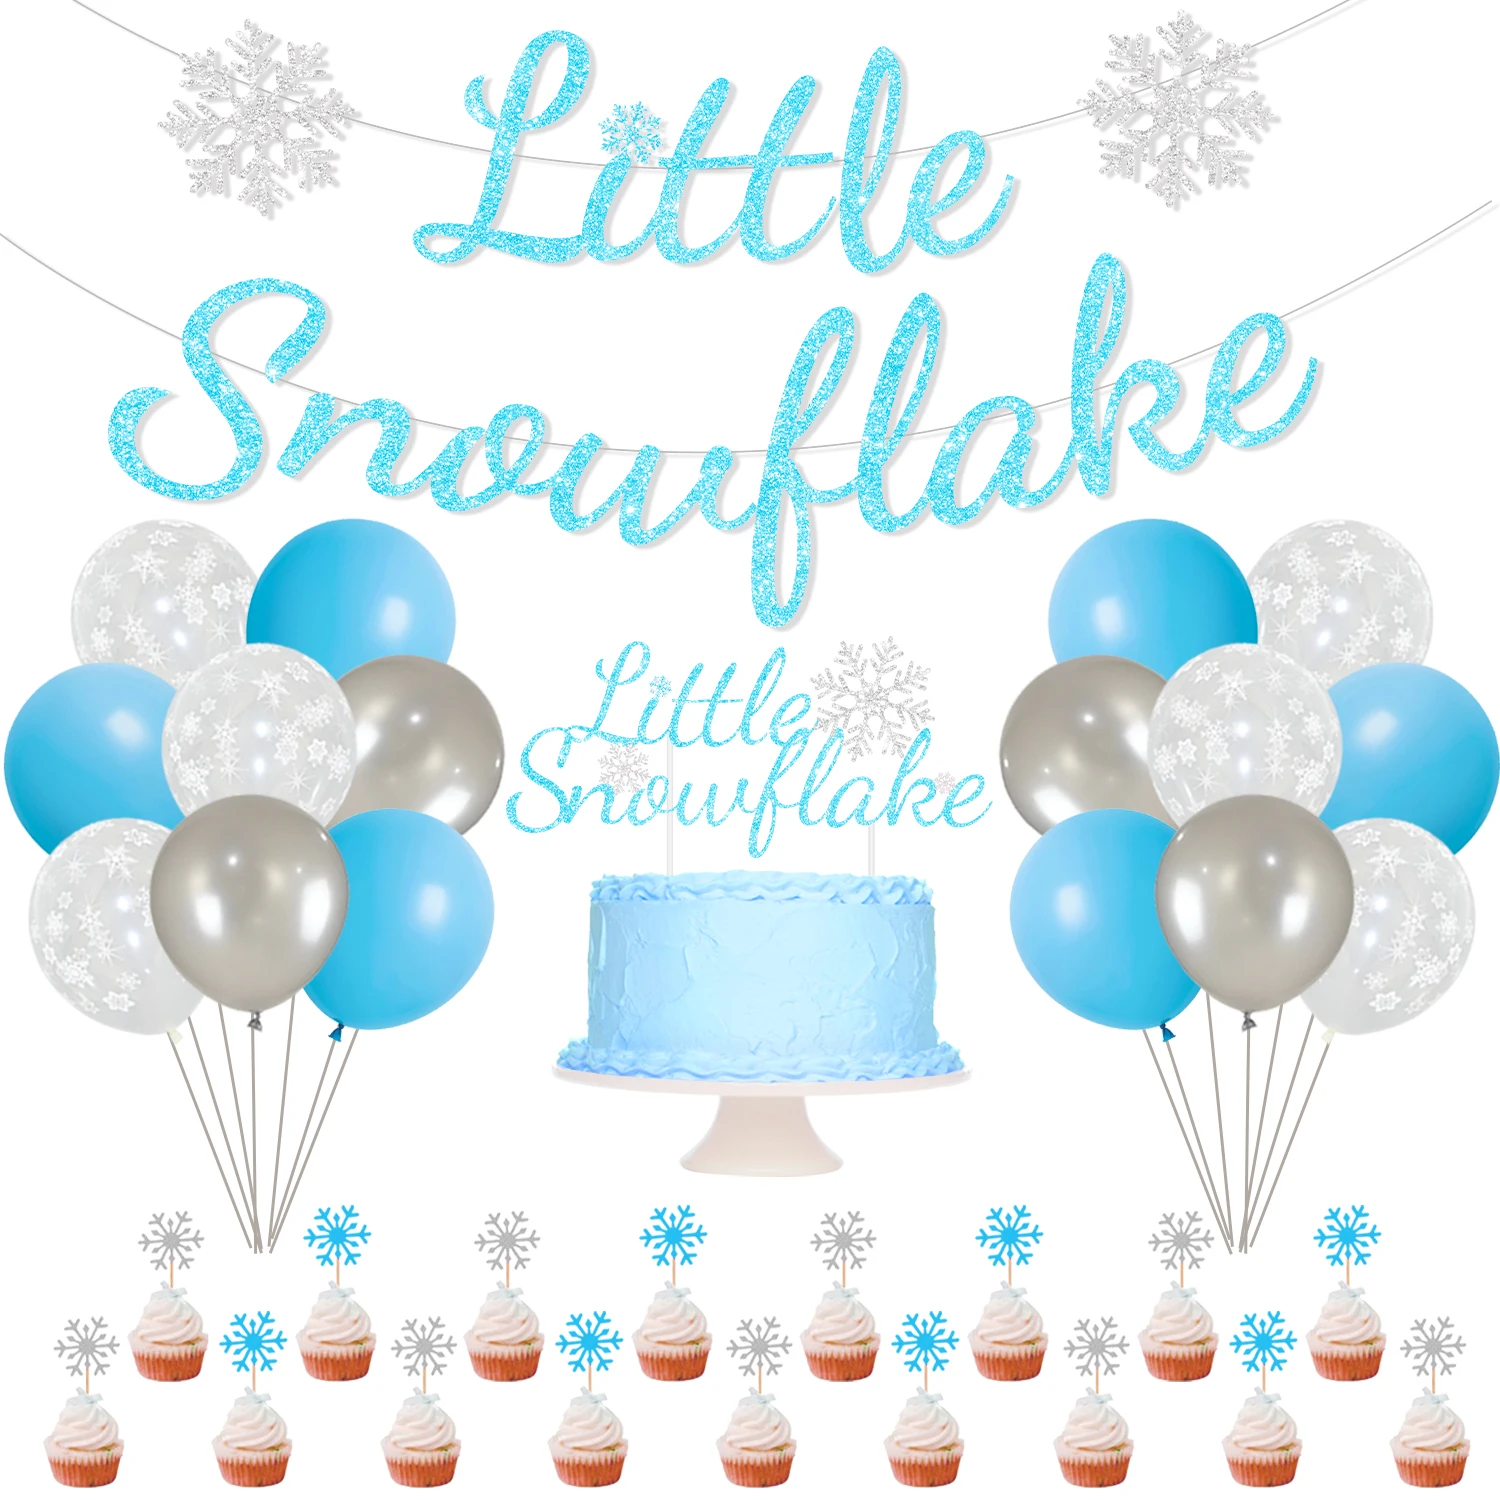 

Cheereveal Blue Sliver Snowflake Balloons Decorations Little Snowflake Banner Kids Winter Theme Birthday Party Baby Shower Decor